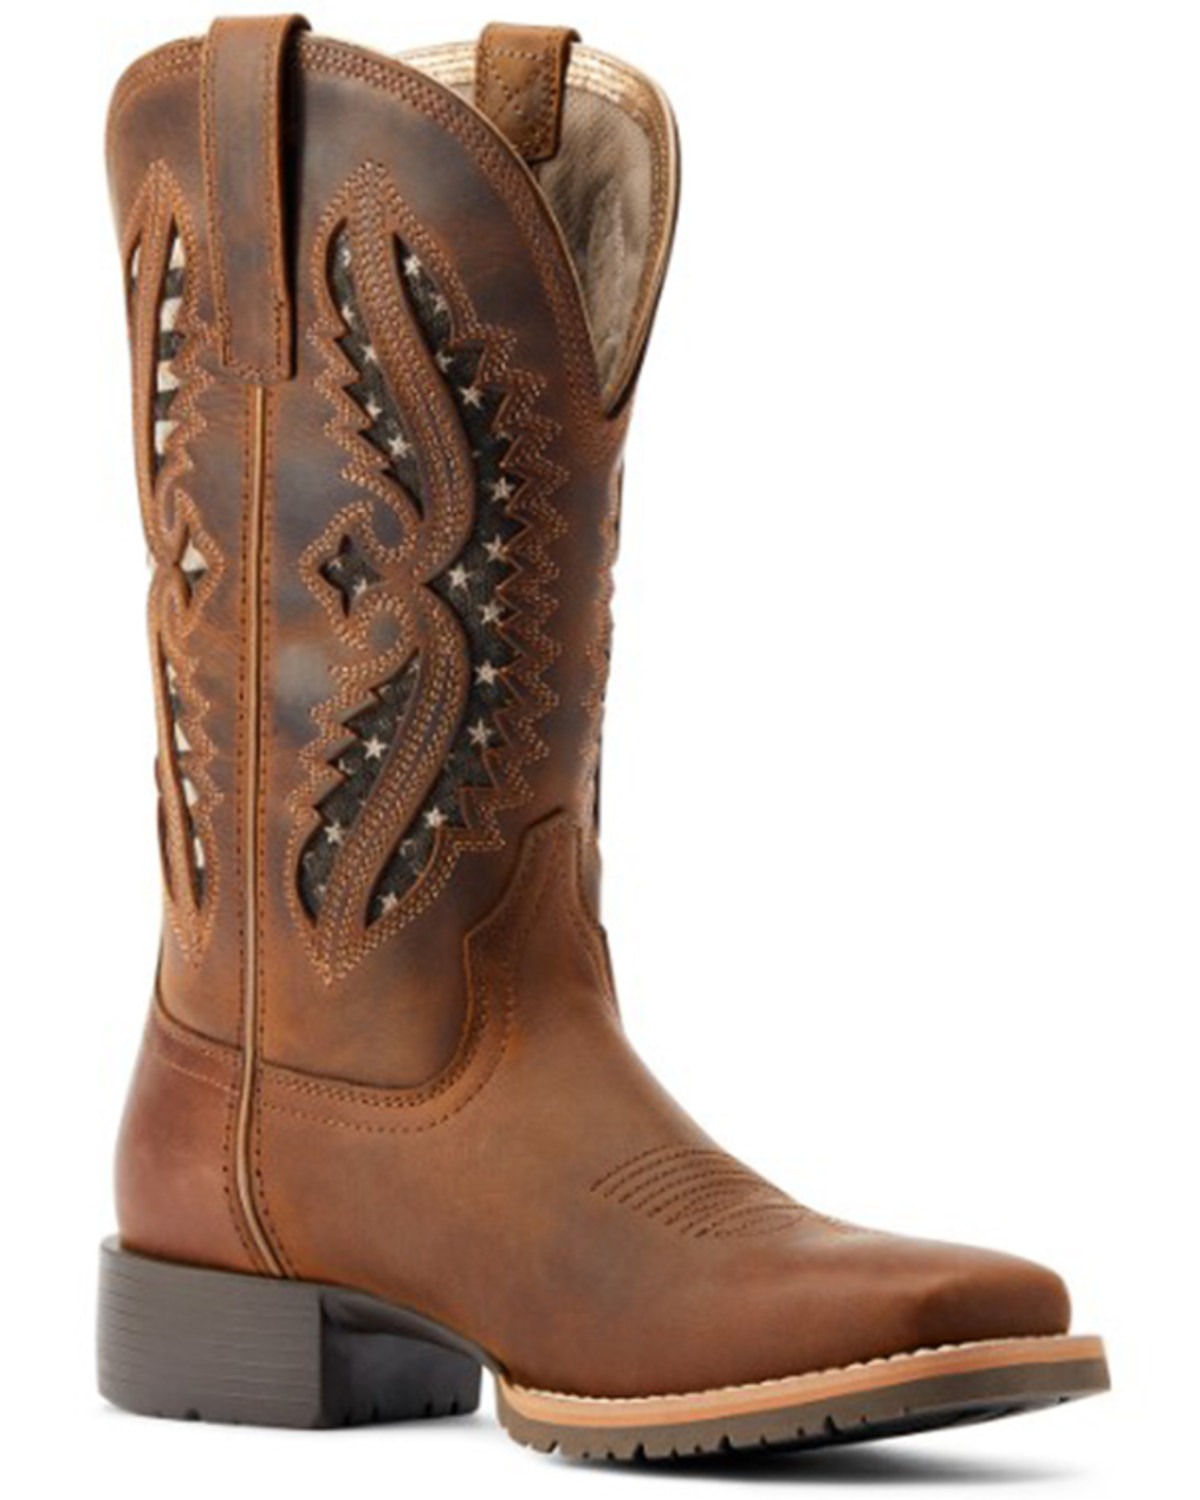 Ariat Women's Hybrid Rancher VentTEK Distressed Western Performance Boots - Broad Square Toe